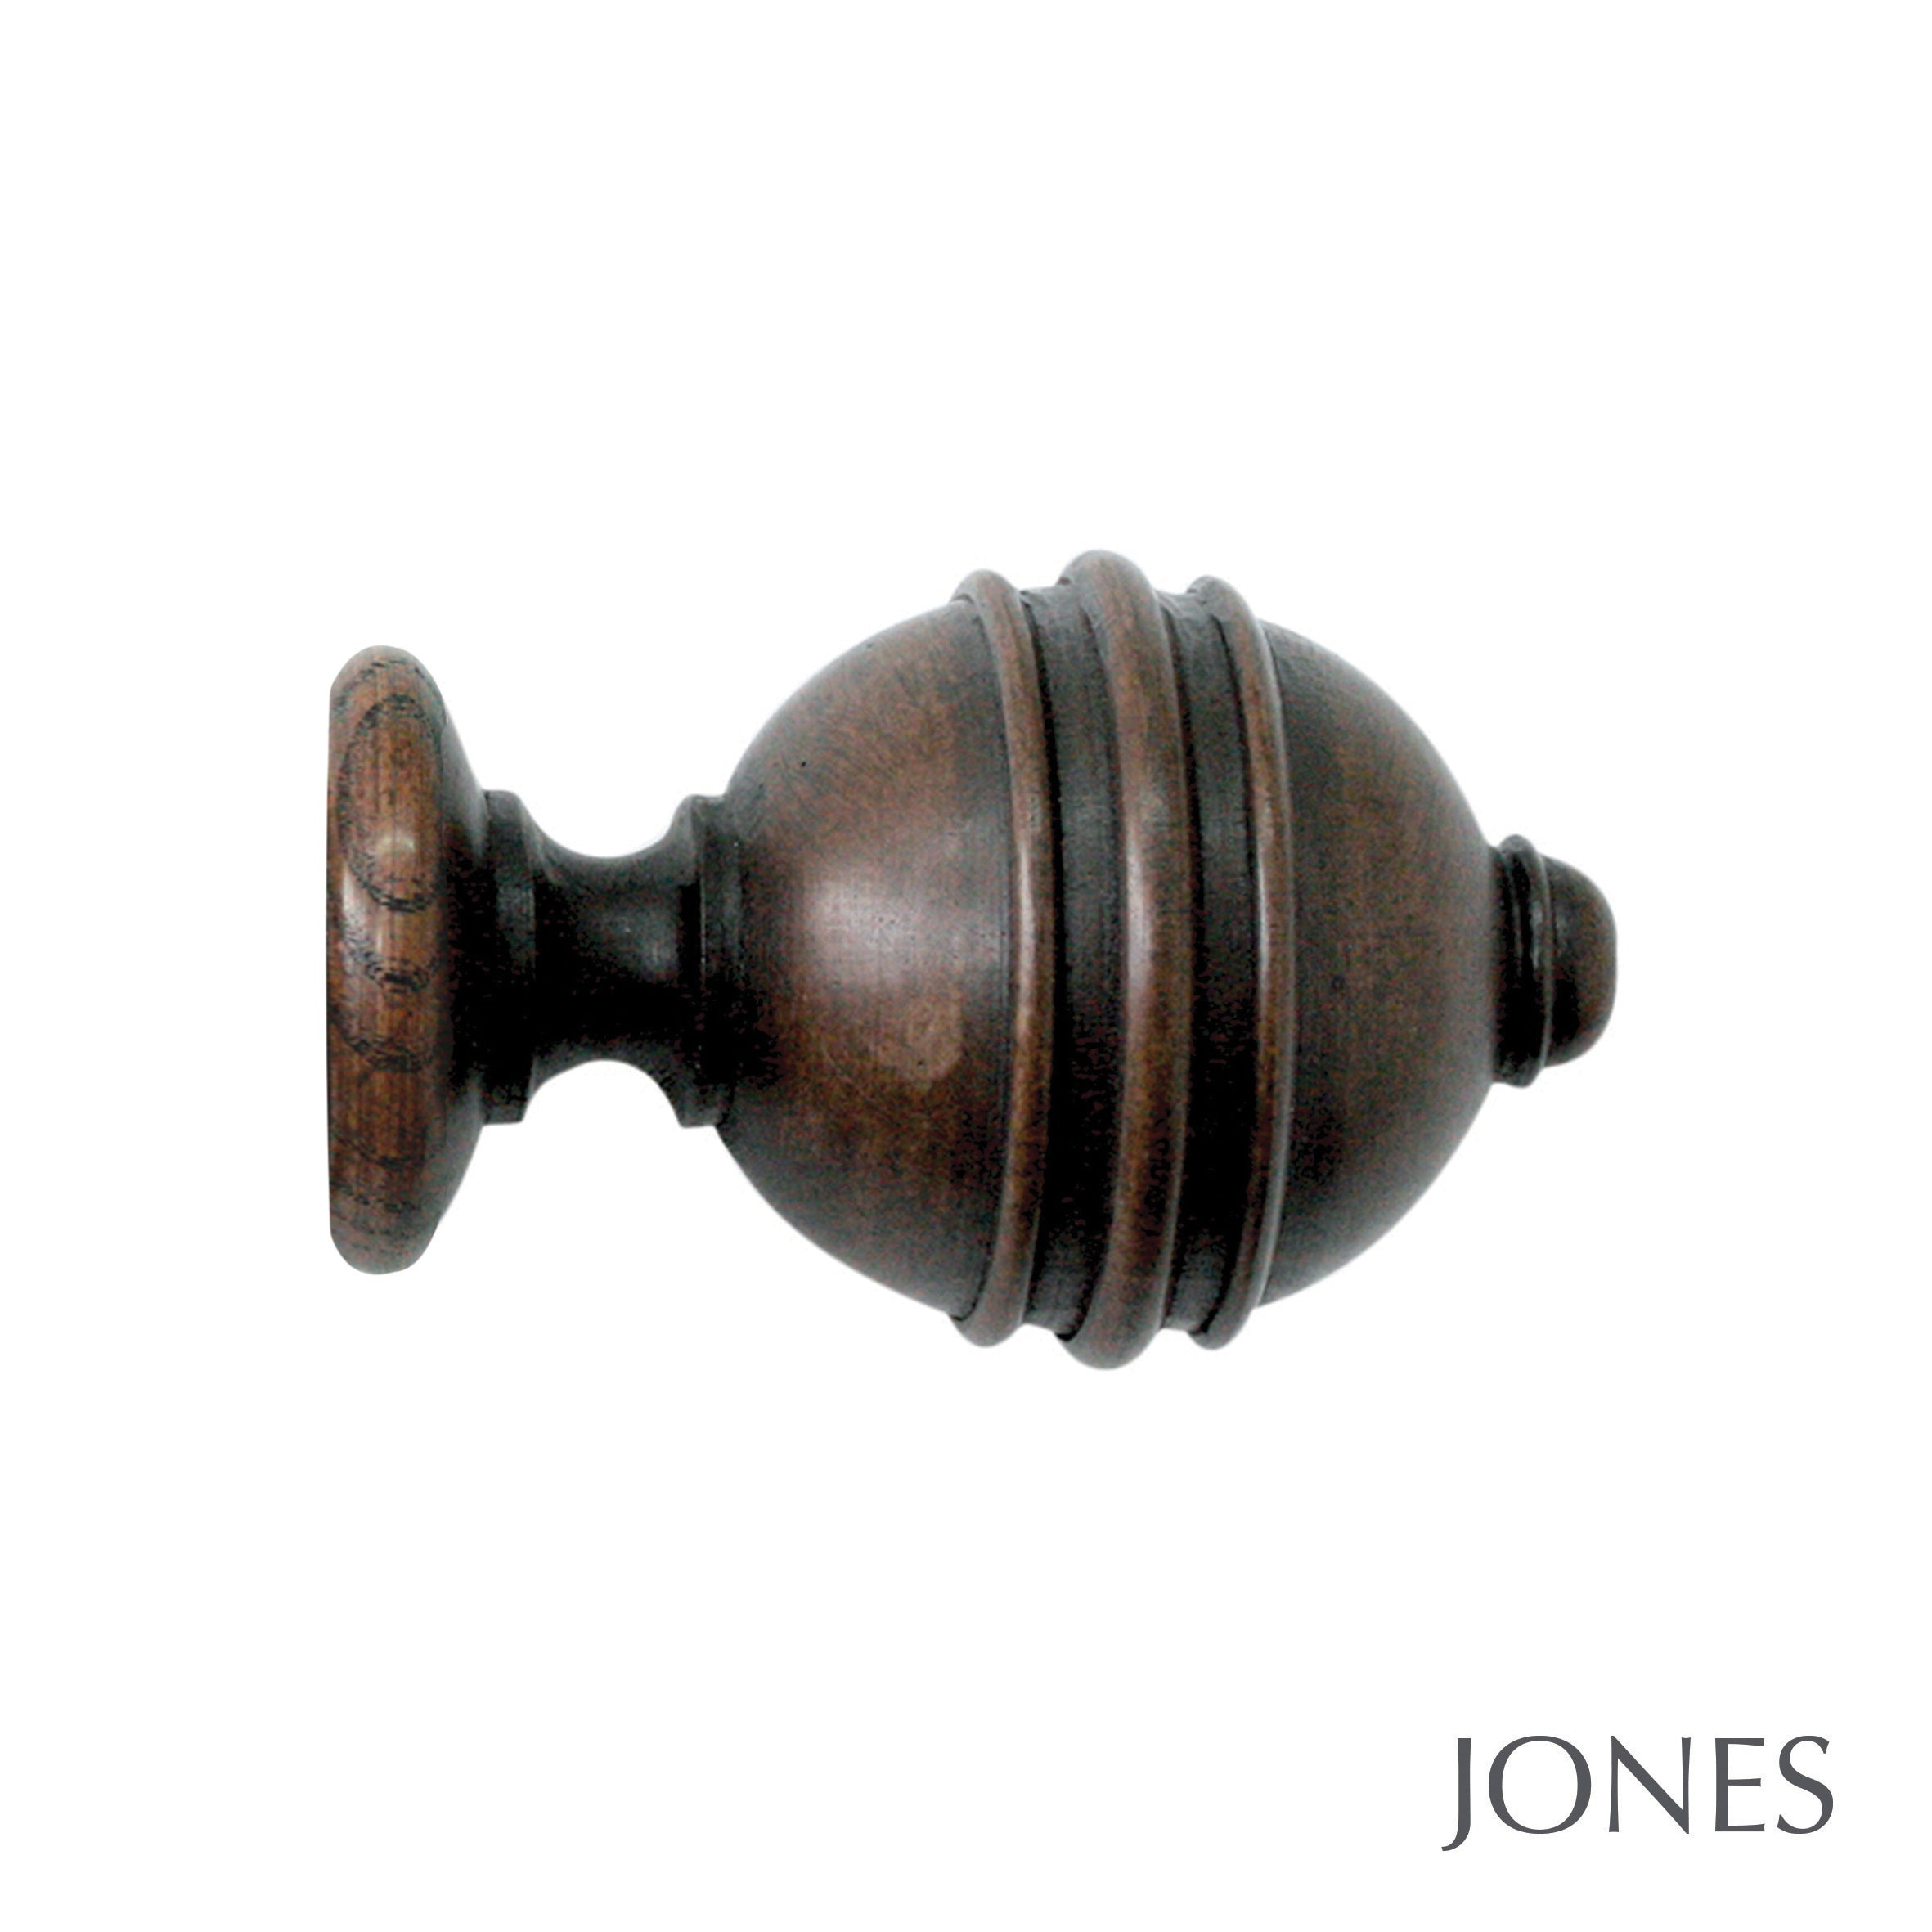 Jones Interiors Cathedral Ely Finial Curtain Pole Set in Oak